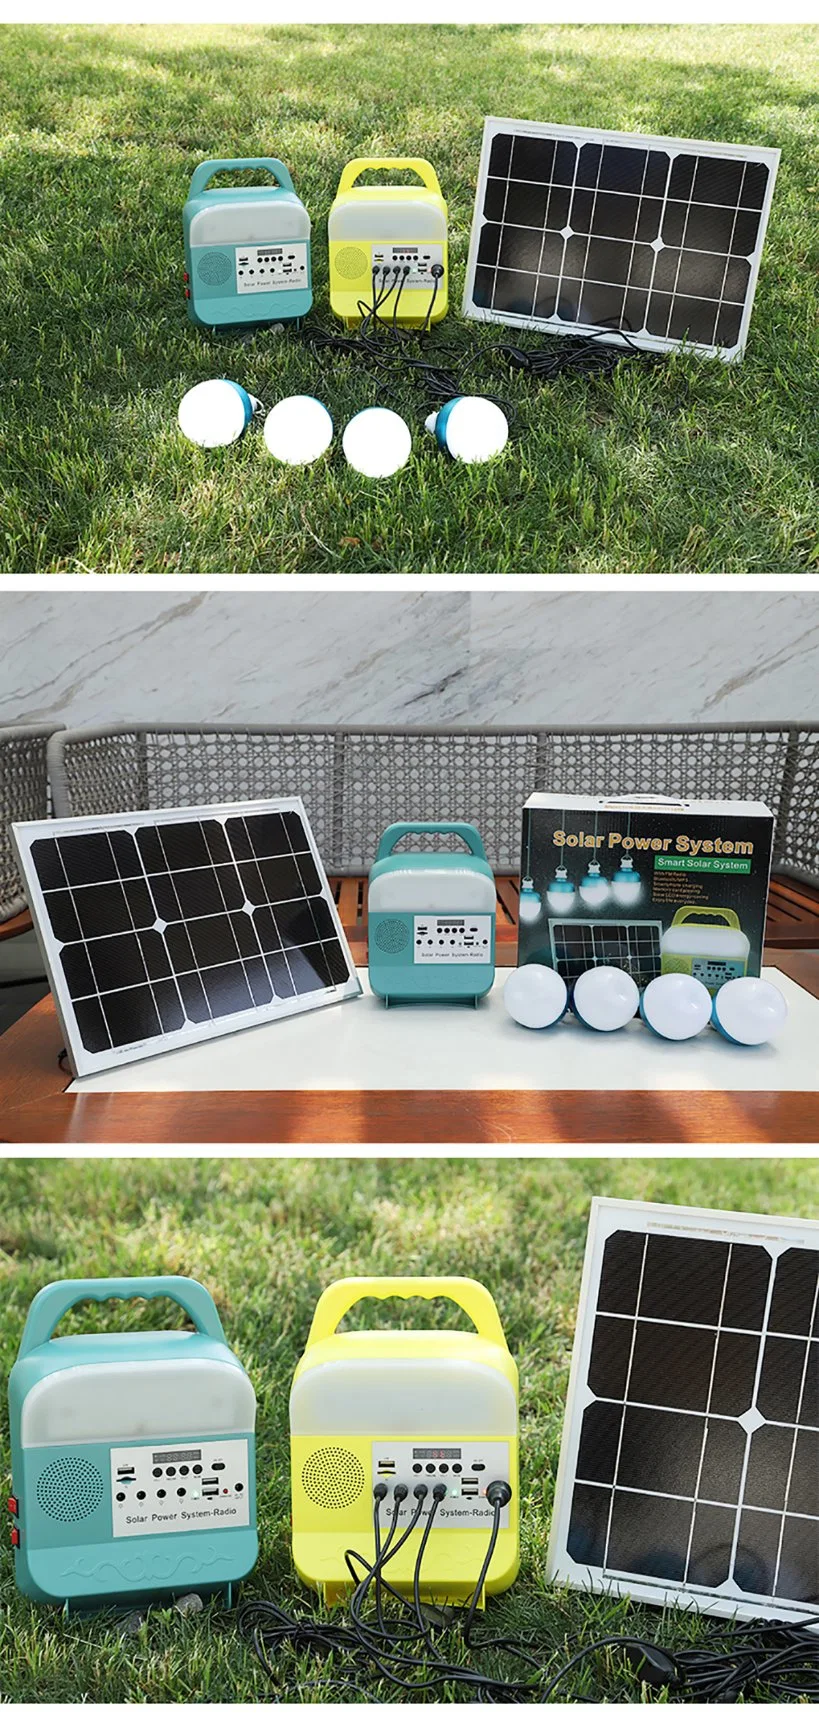 Portable 12V DC Output USB Port Rechargeable Camping Lighting Kit Home Power Solar Energy Systems Small Scale Solar Power Kits